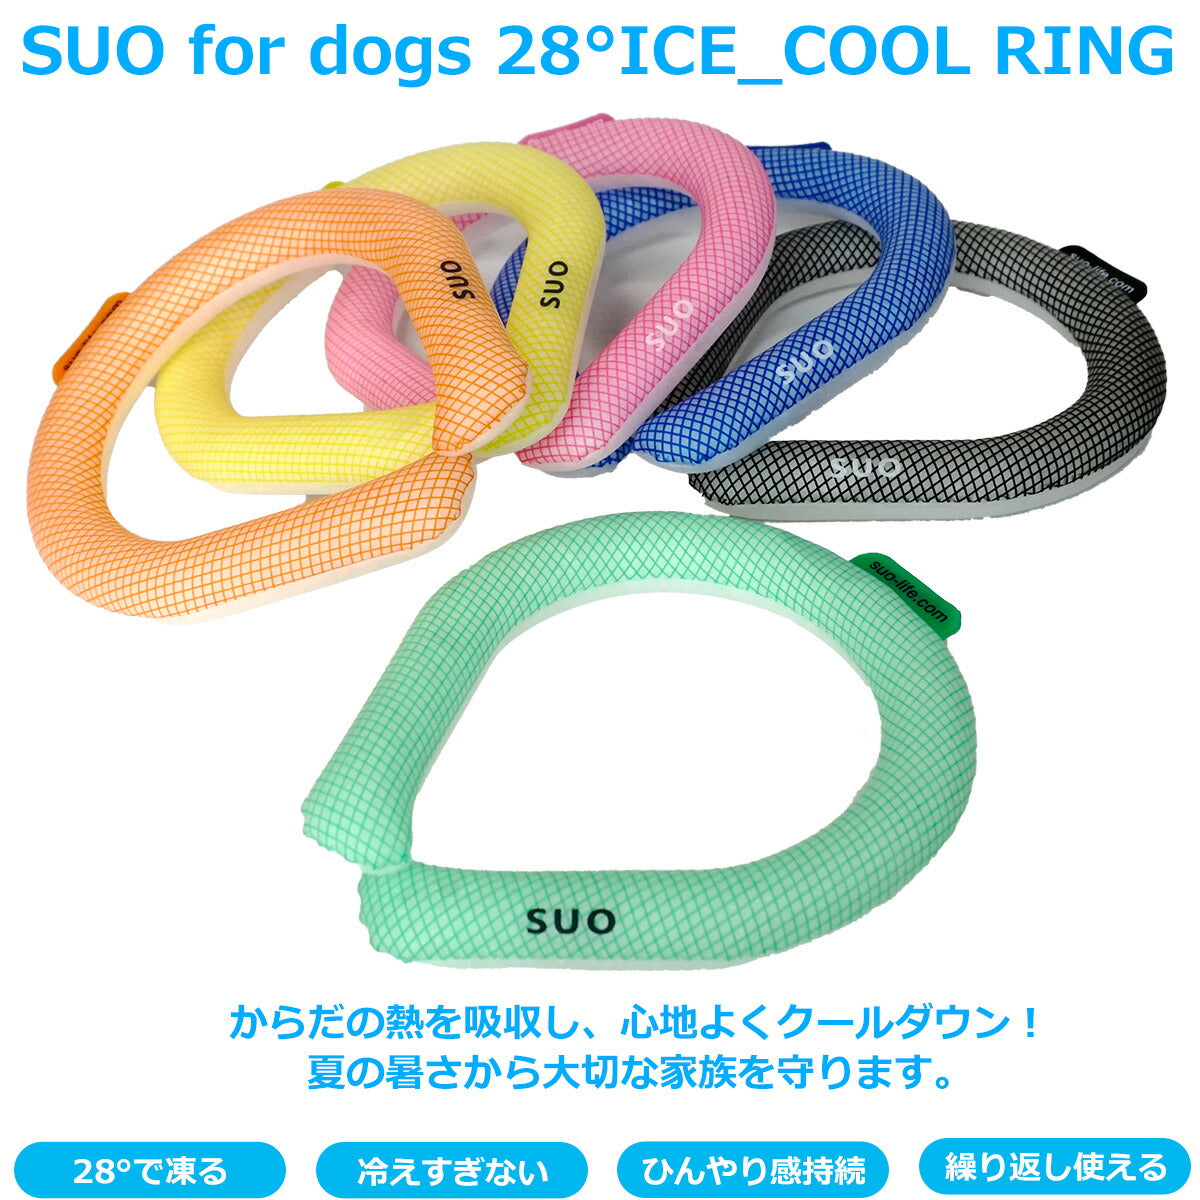 SUO for dogs 28°ICE SUOリング ボタンなし S ピンク 熱中症対策グッズ 暑さ対策 ひんやり 首 冷感 犬 大人 子供